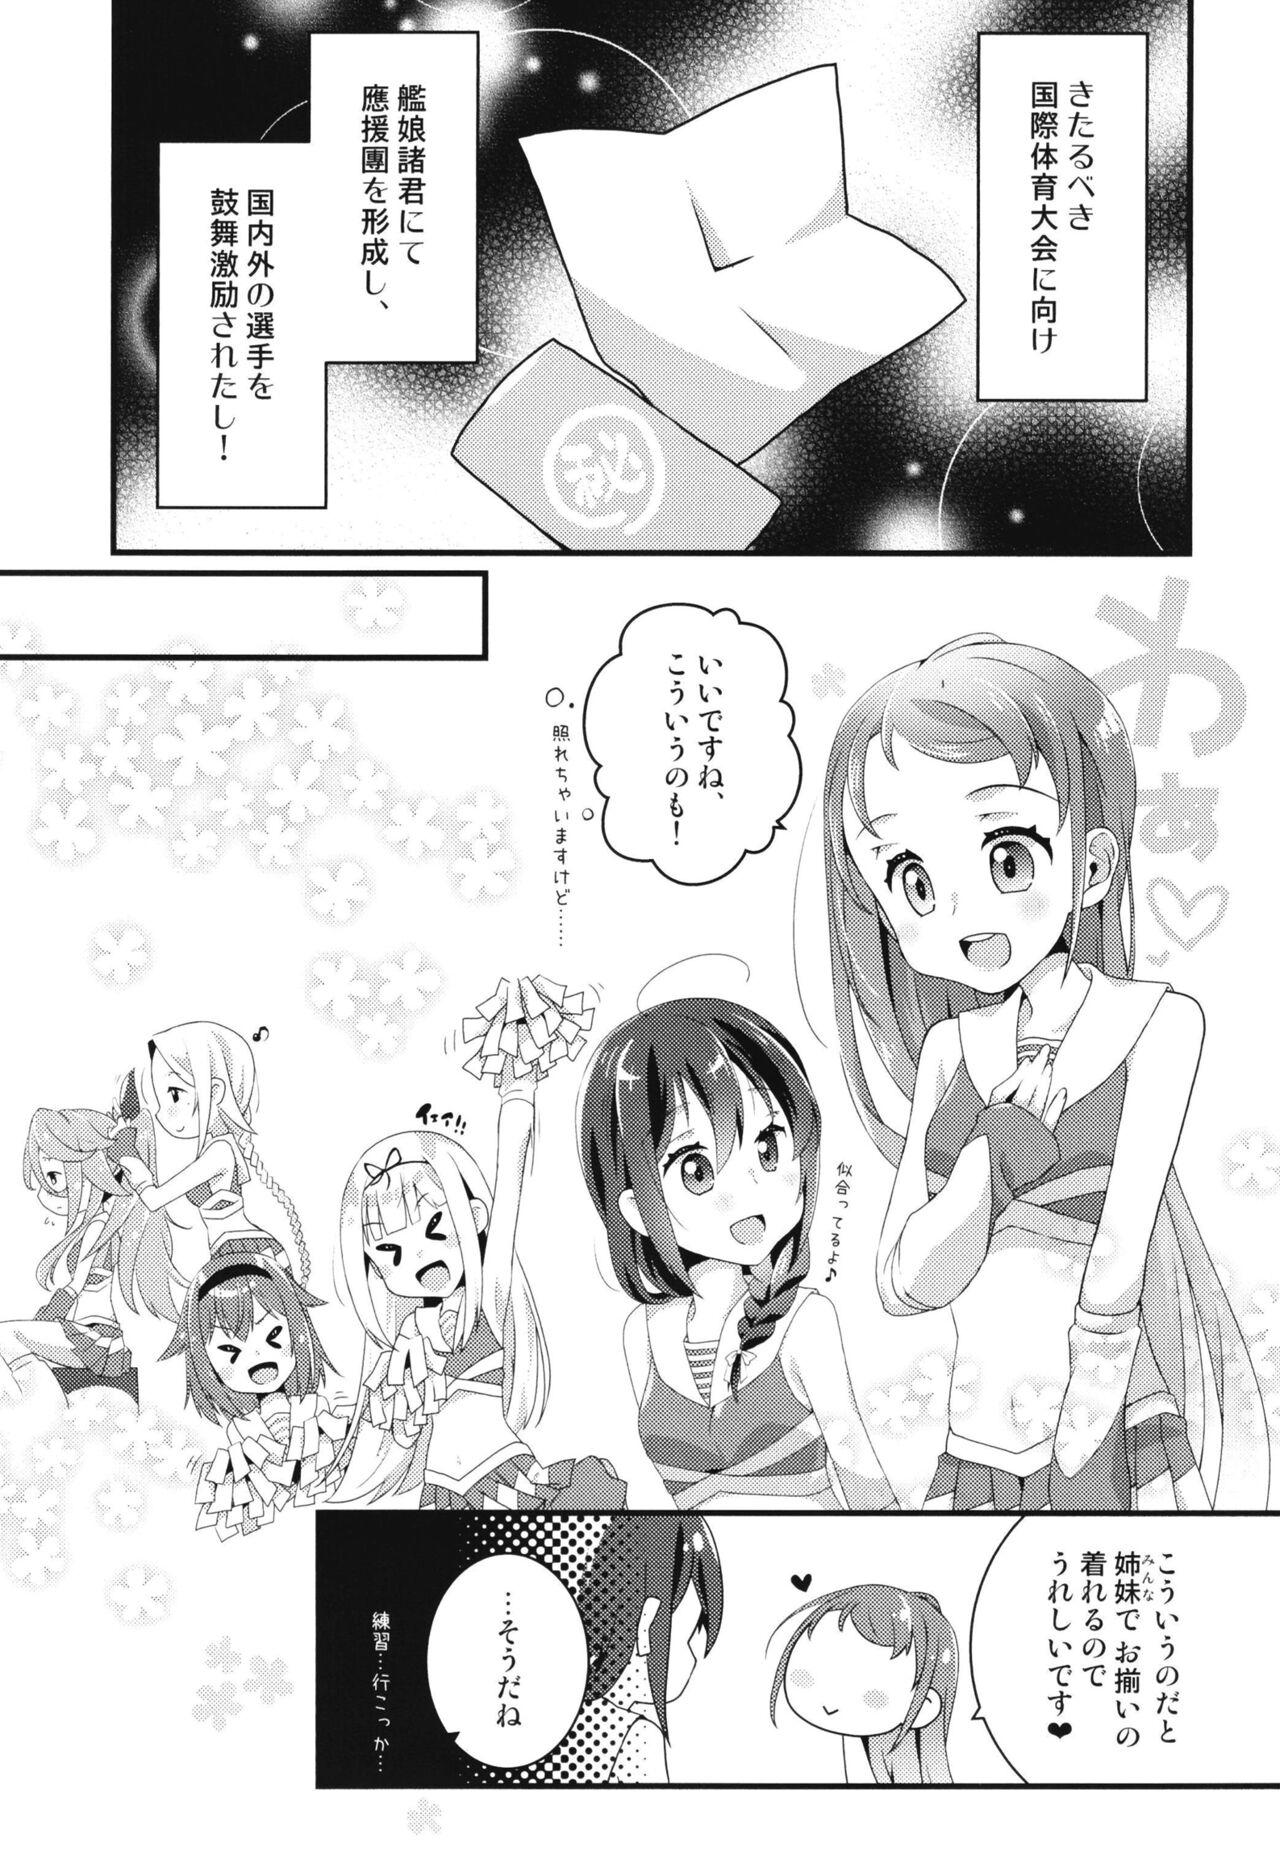 Firsttime Yah! Cheer! yeah! - Kantai collection Large - Page 3